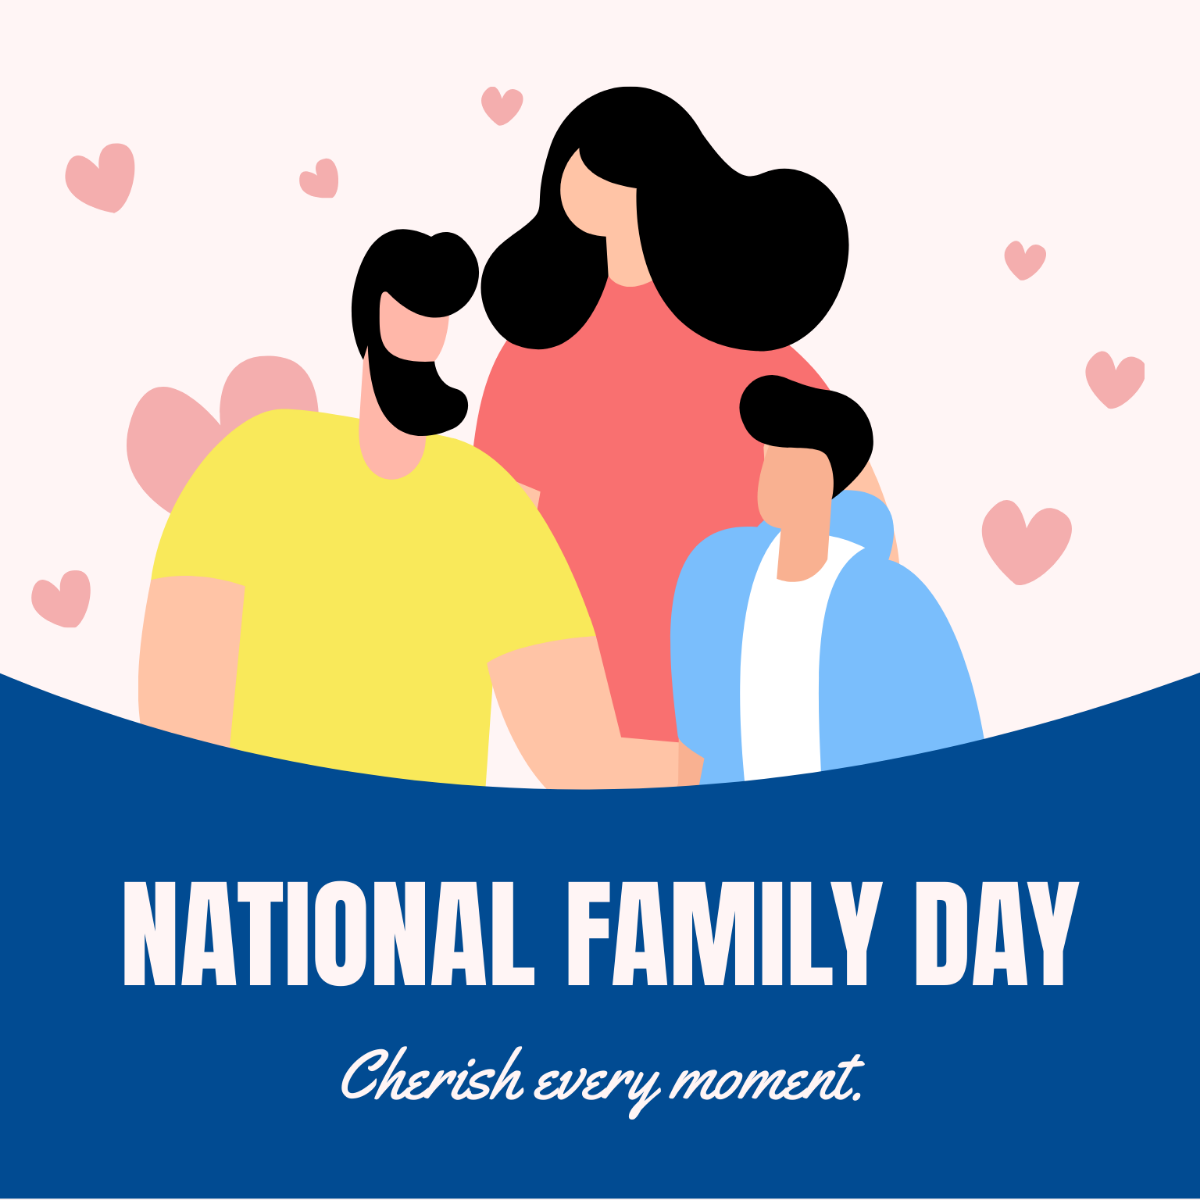 Free National Family Day Poster Vector Template